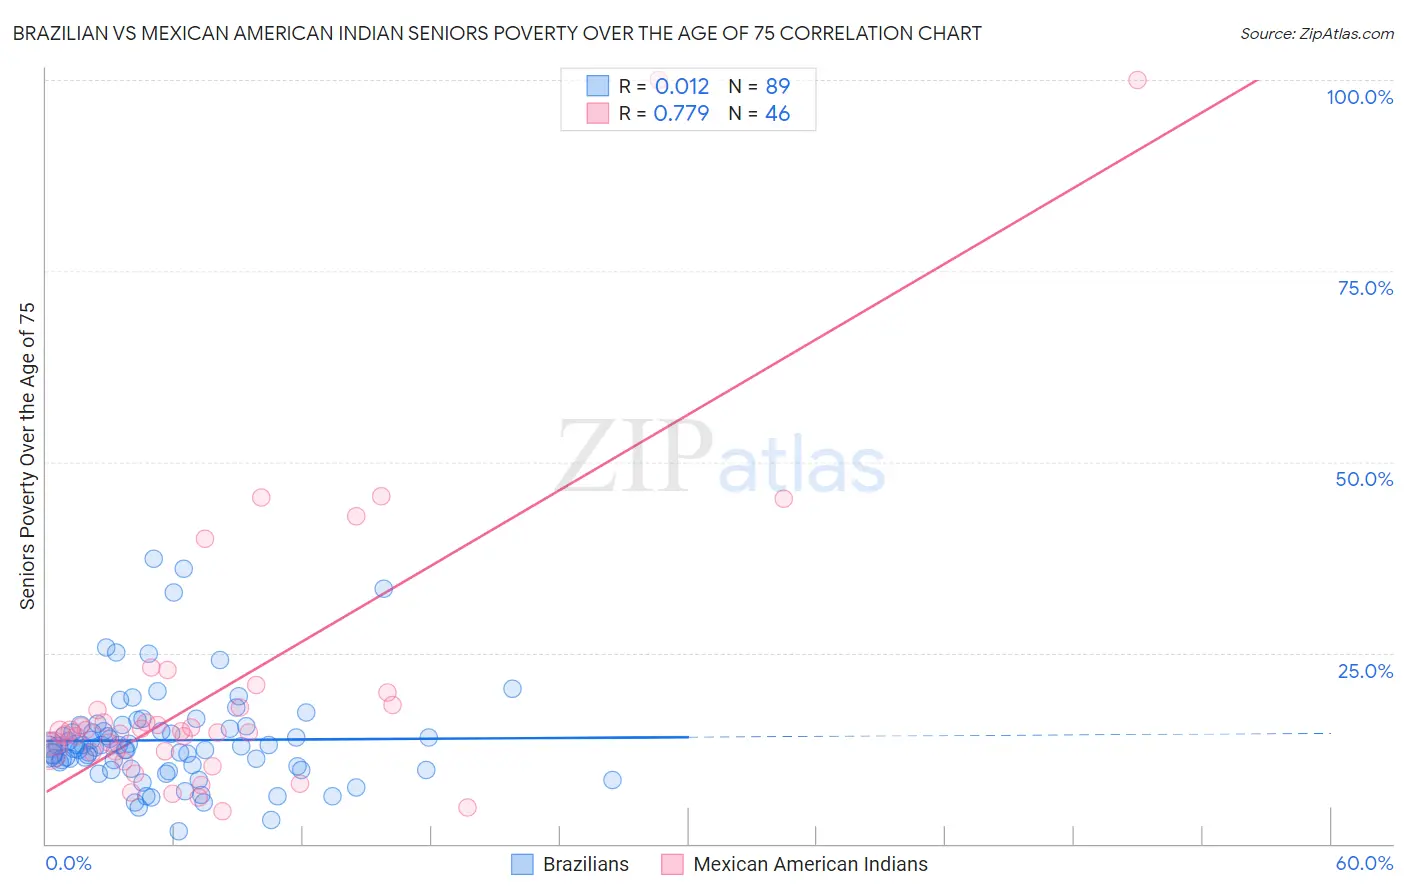 Brazilian vs Mexican American Indian Seniors Poverty Over the Age of 75